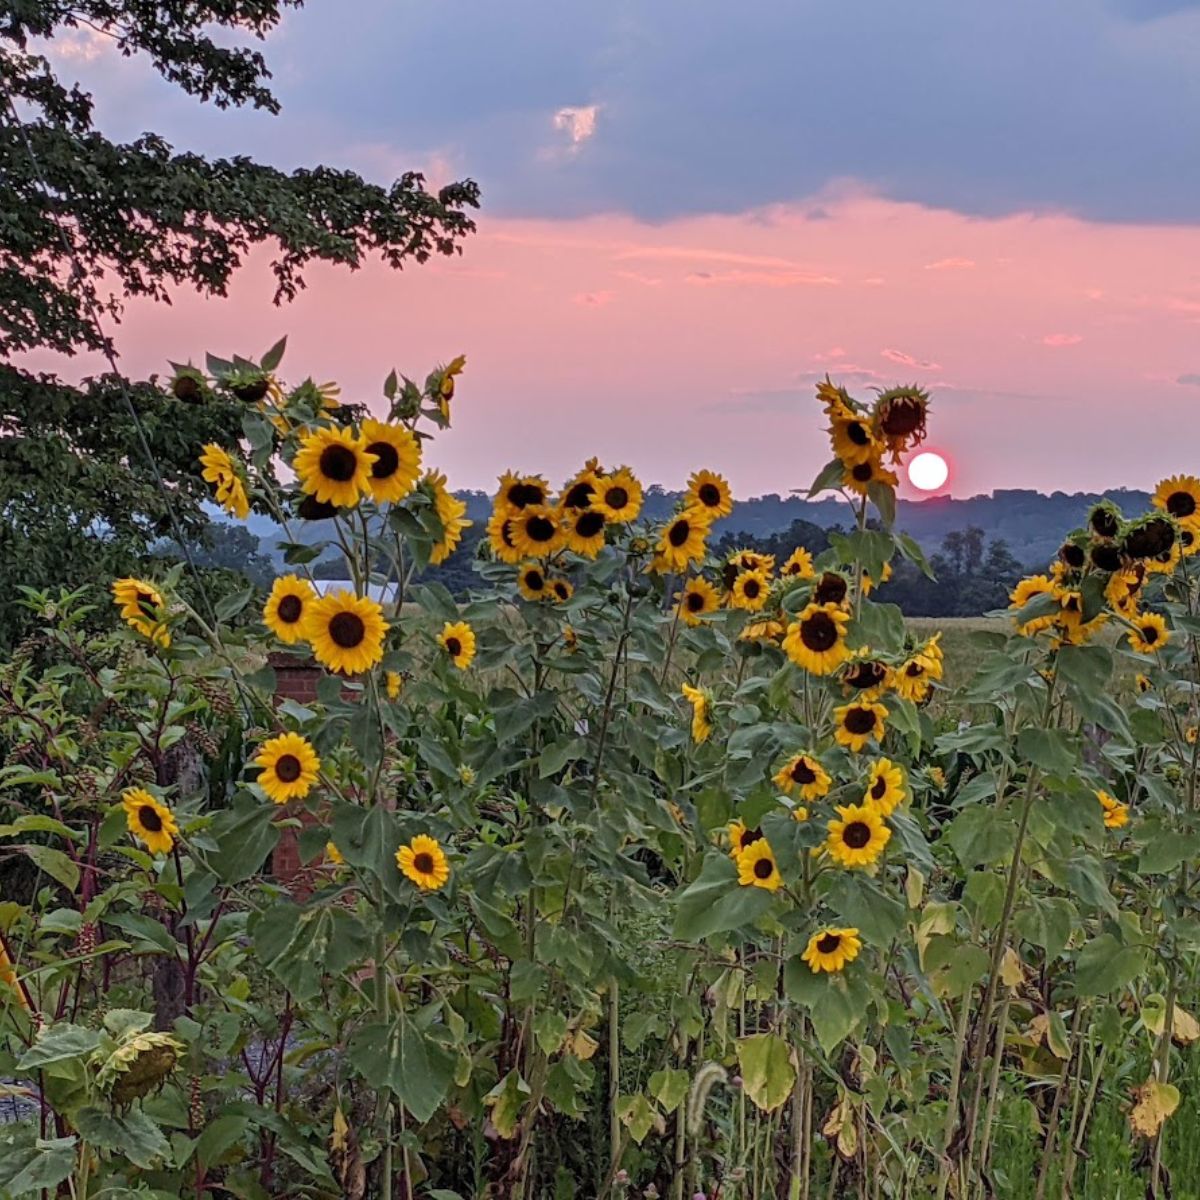 sunflowers with the sun setting in the background.